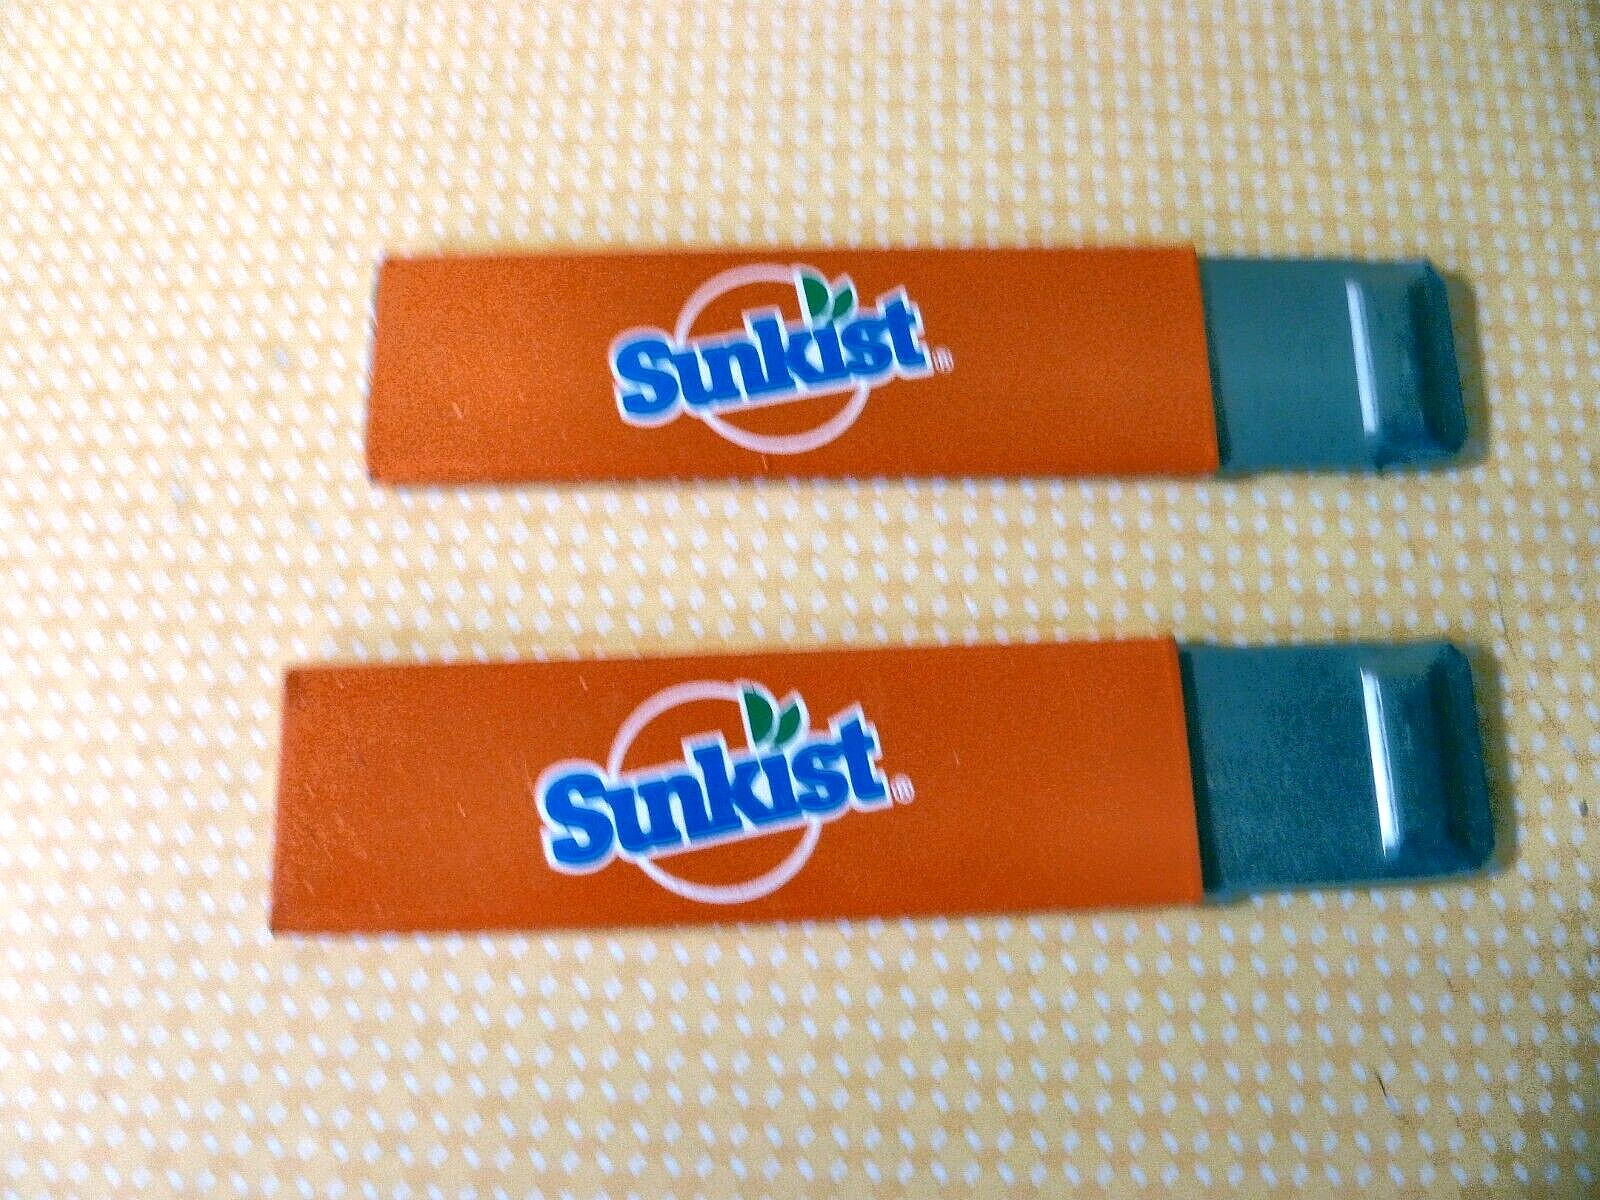 Pair of Collectible Vintage 1980's Sunkist Box Cutters - NOS